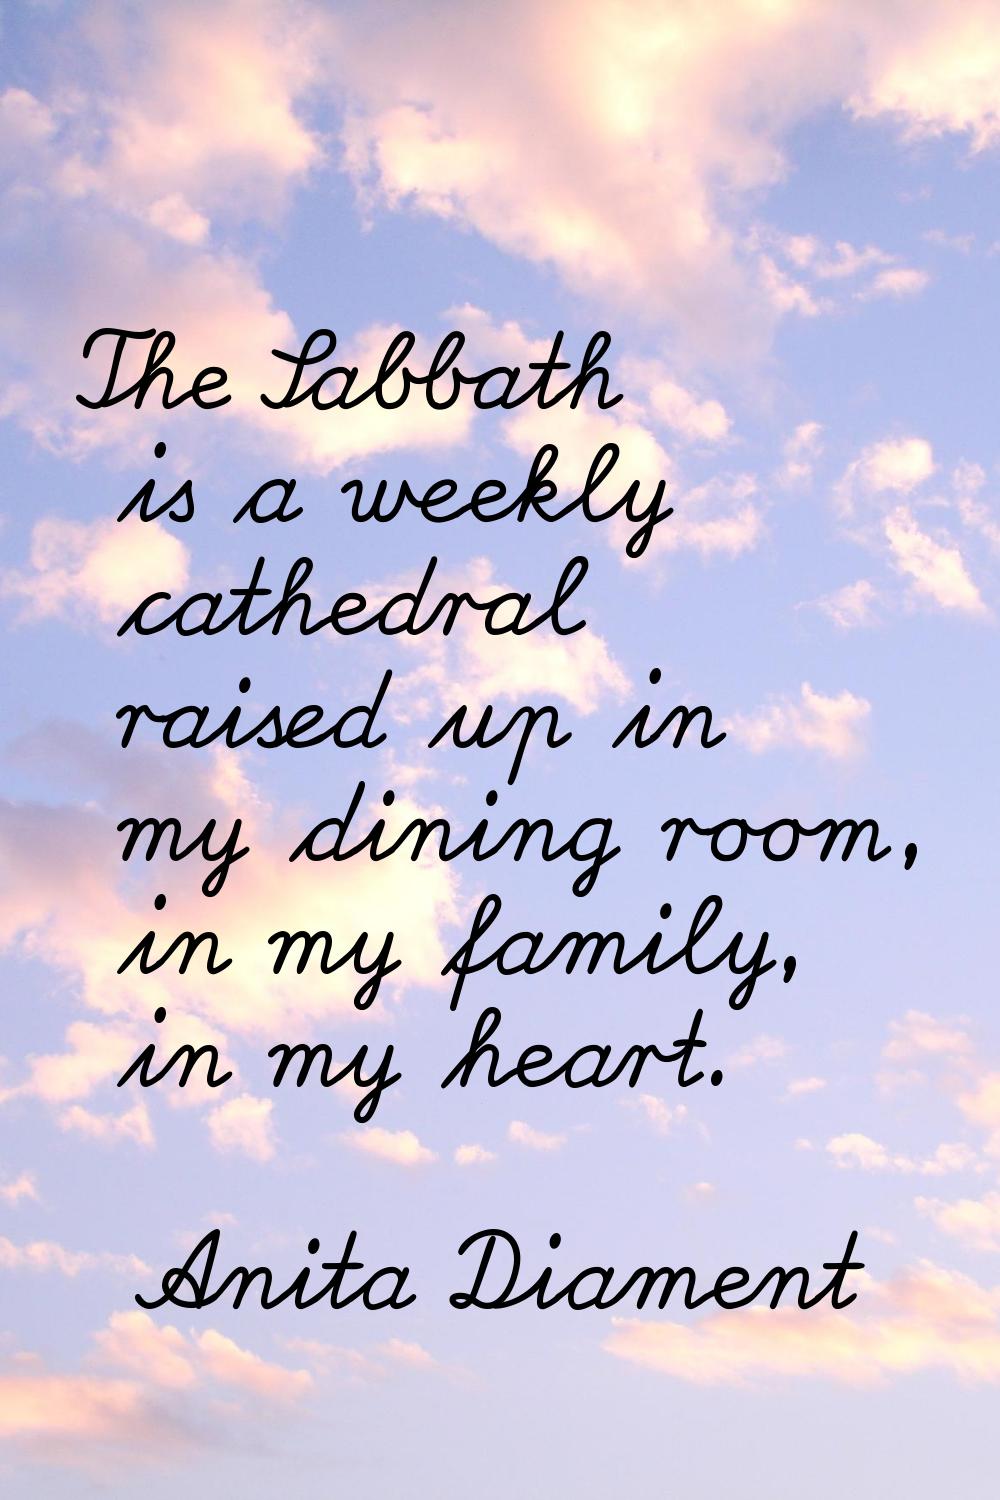 The Sabbath is a weekly cathedral raised up in my dining room, in my family, in my heart.